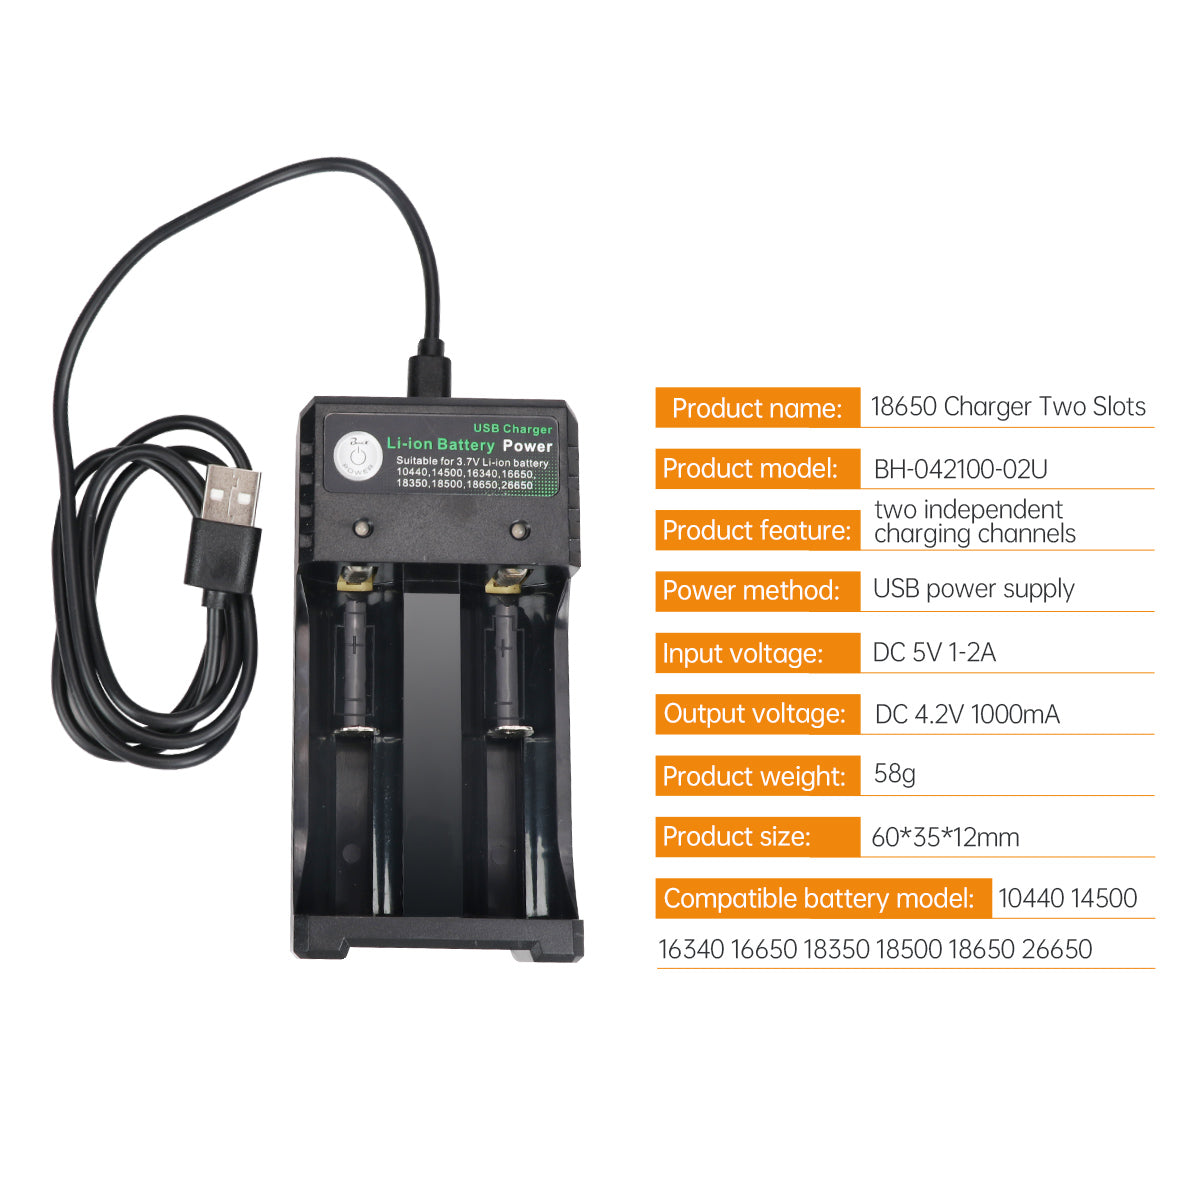 Li-ion Battery Power 2-Slots 18650 Battery Charger with USB – Hiwonder